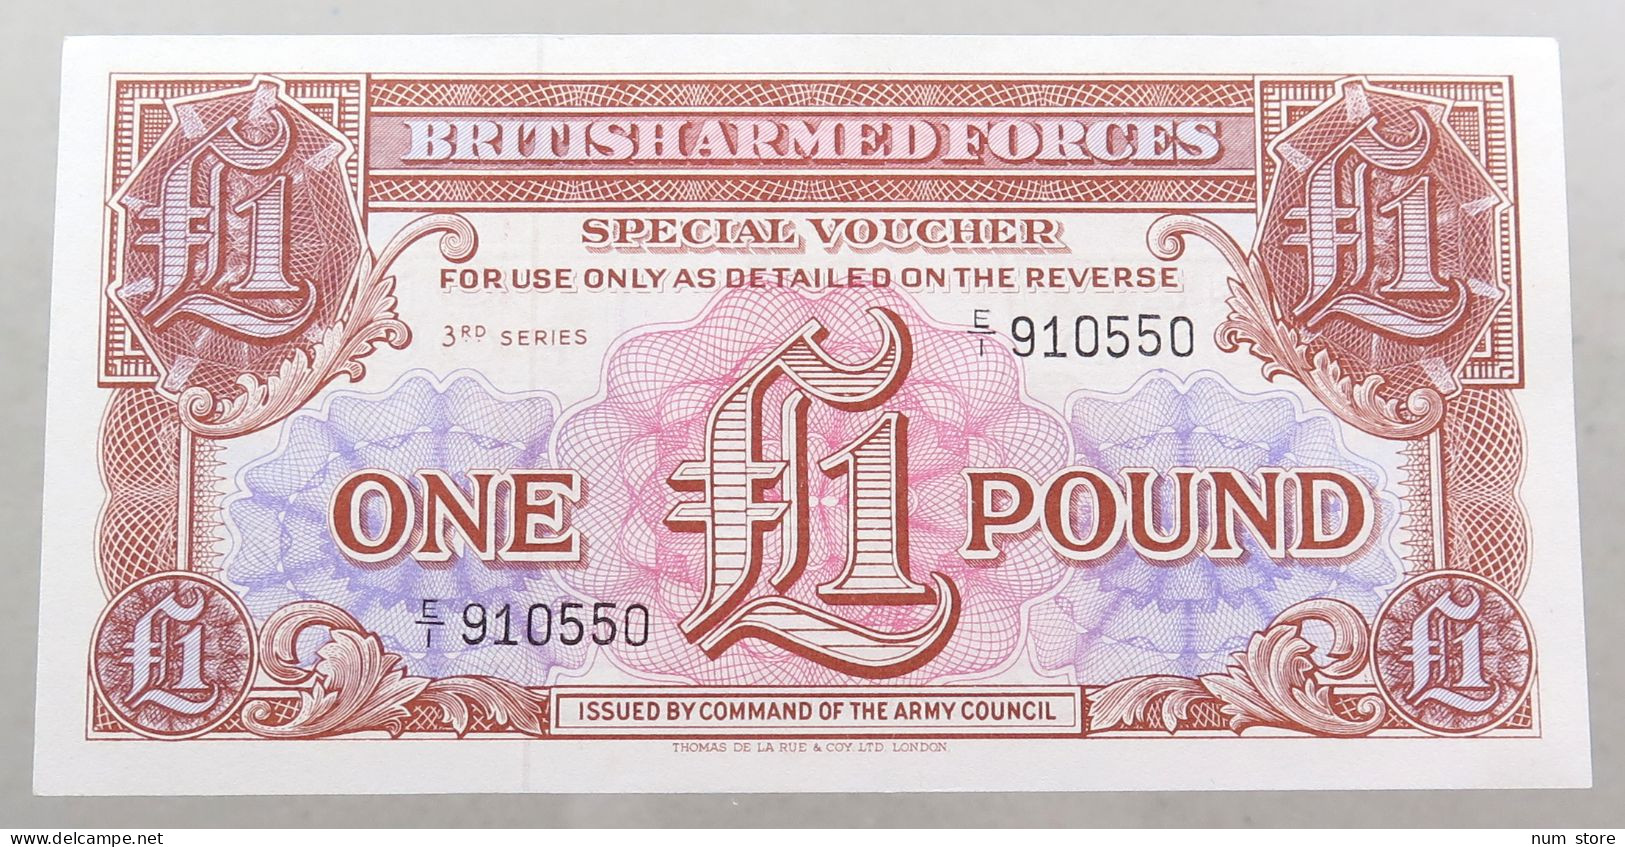 GREAT BRITAIN 1 POUND BRITISH ARMED FORCES TOP #alb049 0193 - British Armed Forces & Special Vouchers